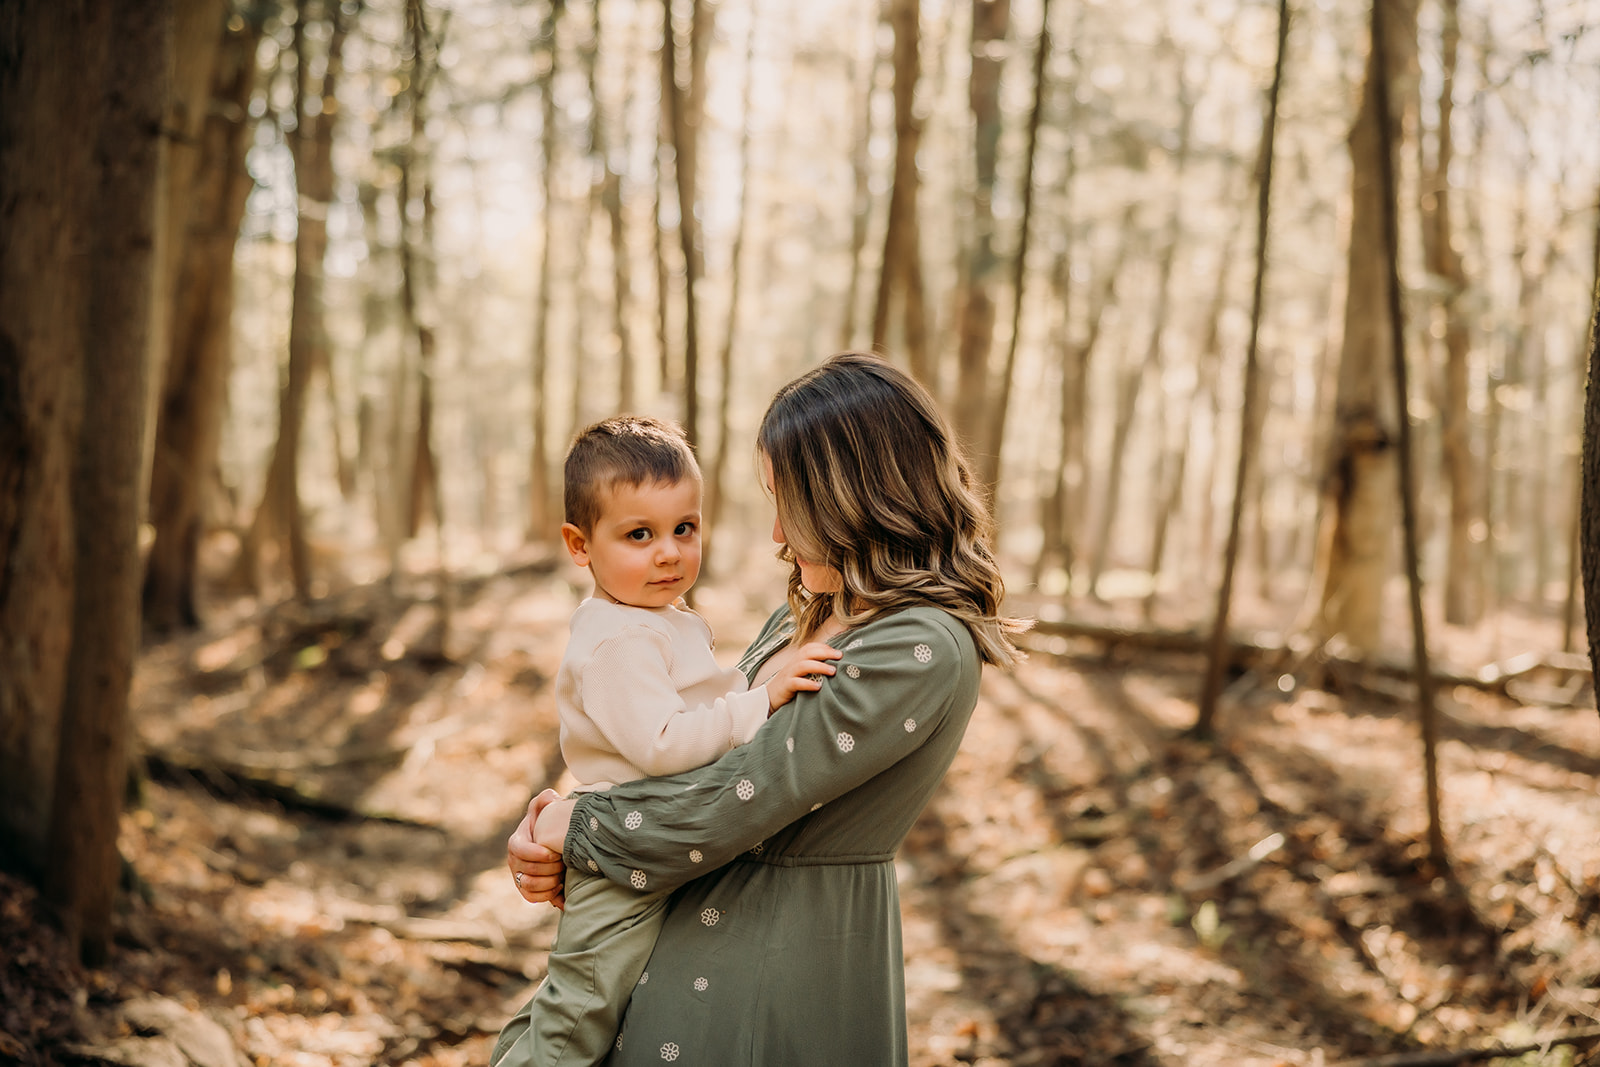 Radiant mother and child in a picturesque forest photoshoot